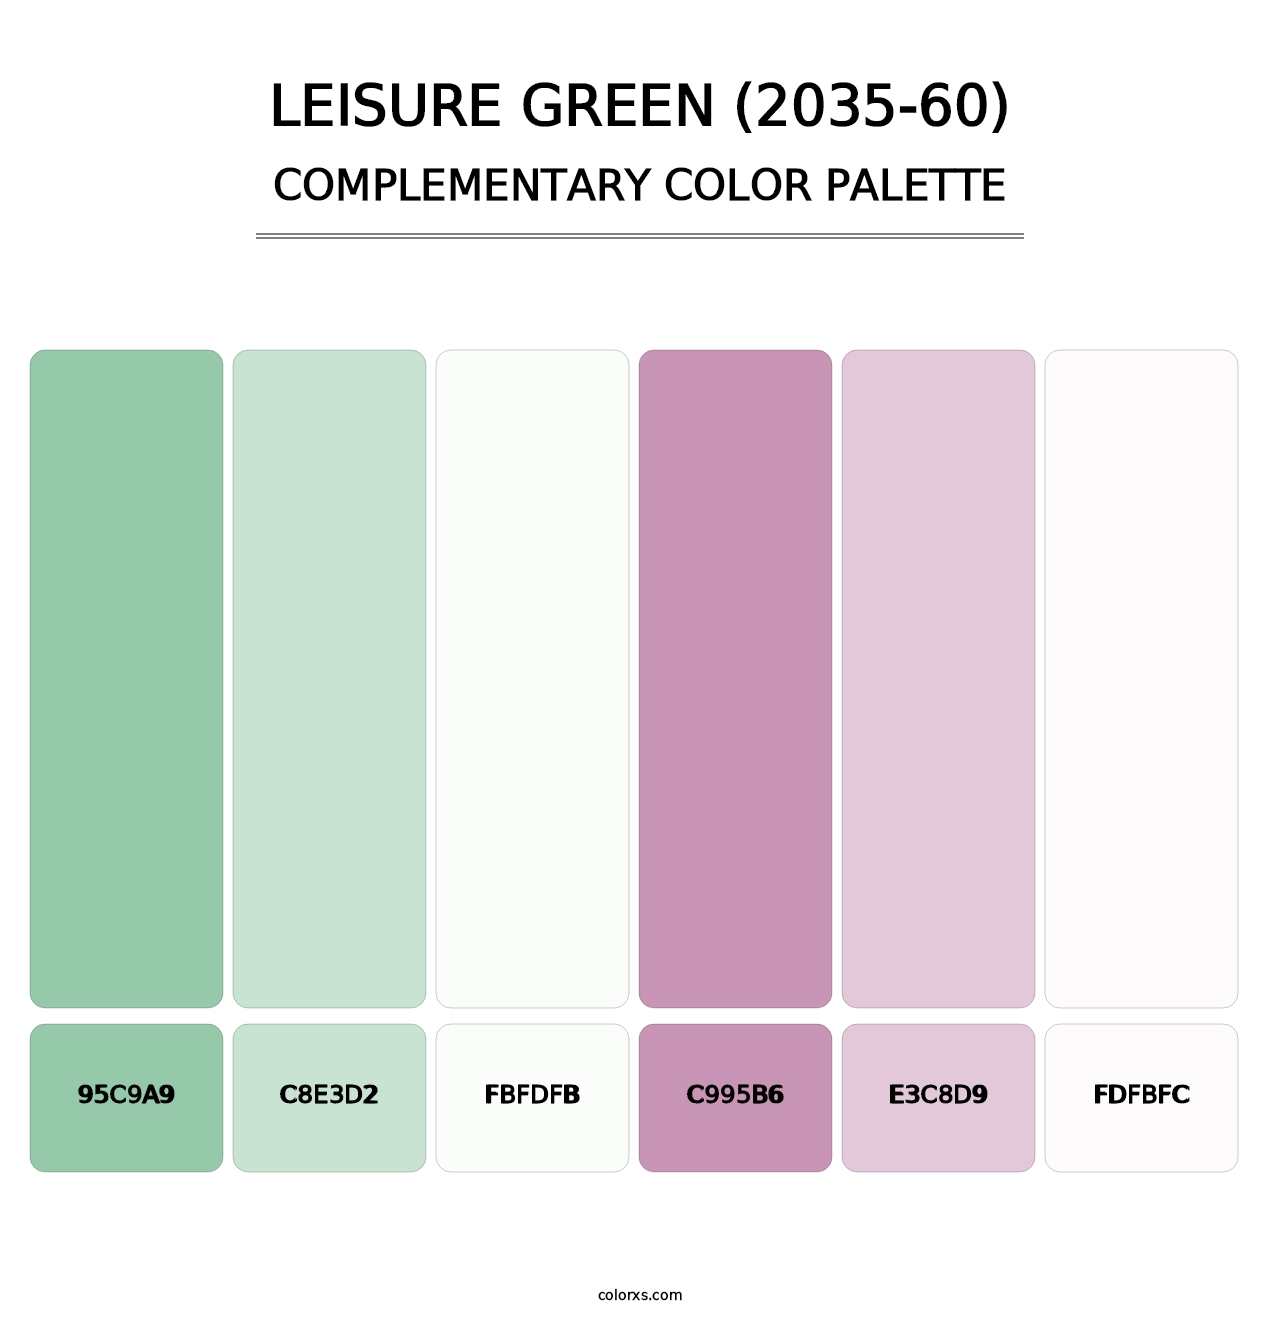 Leisure Green (2035-60) - Complementary Color Palette